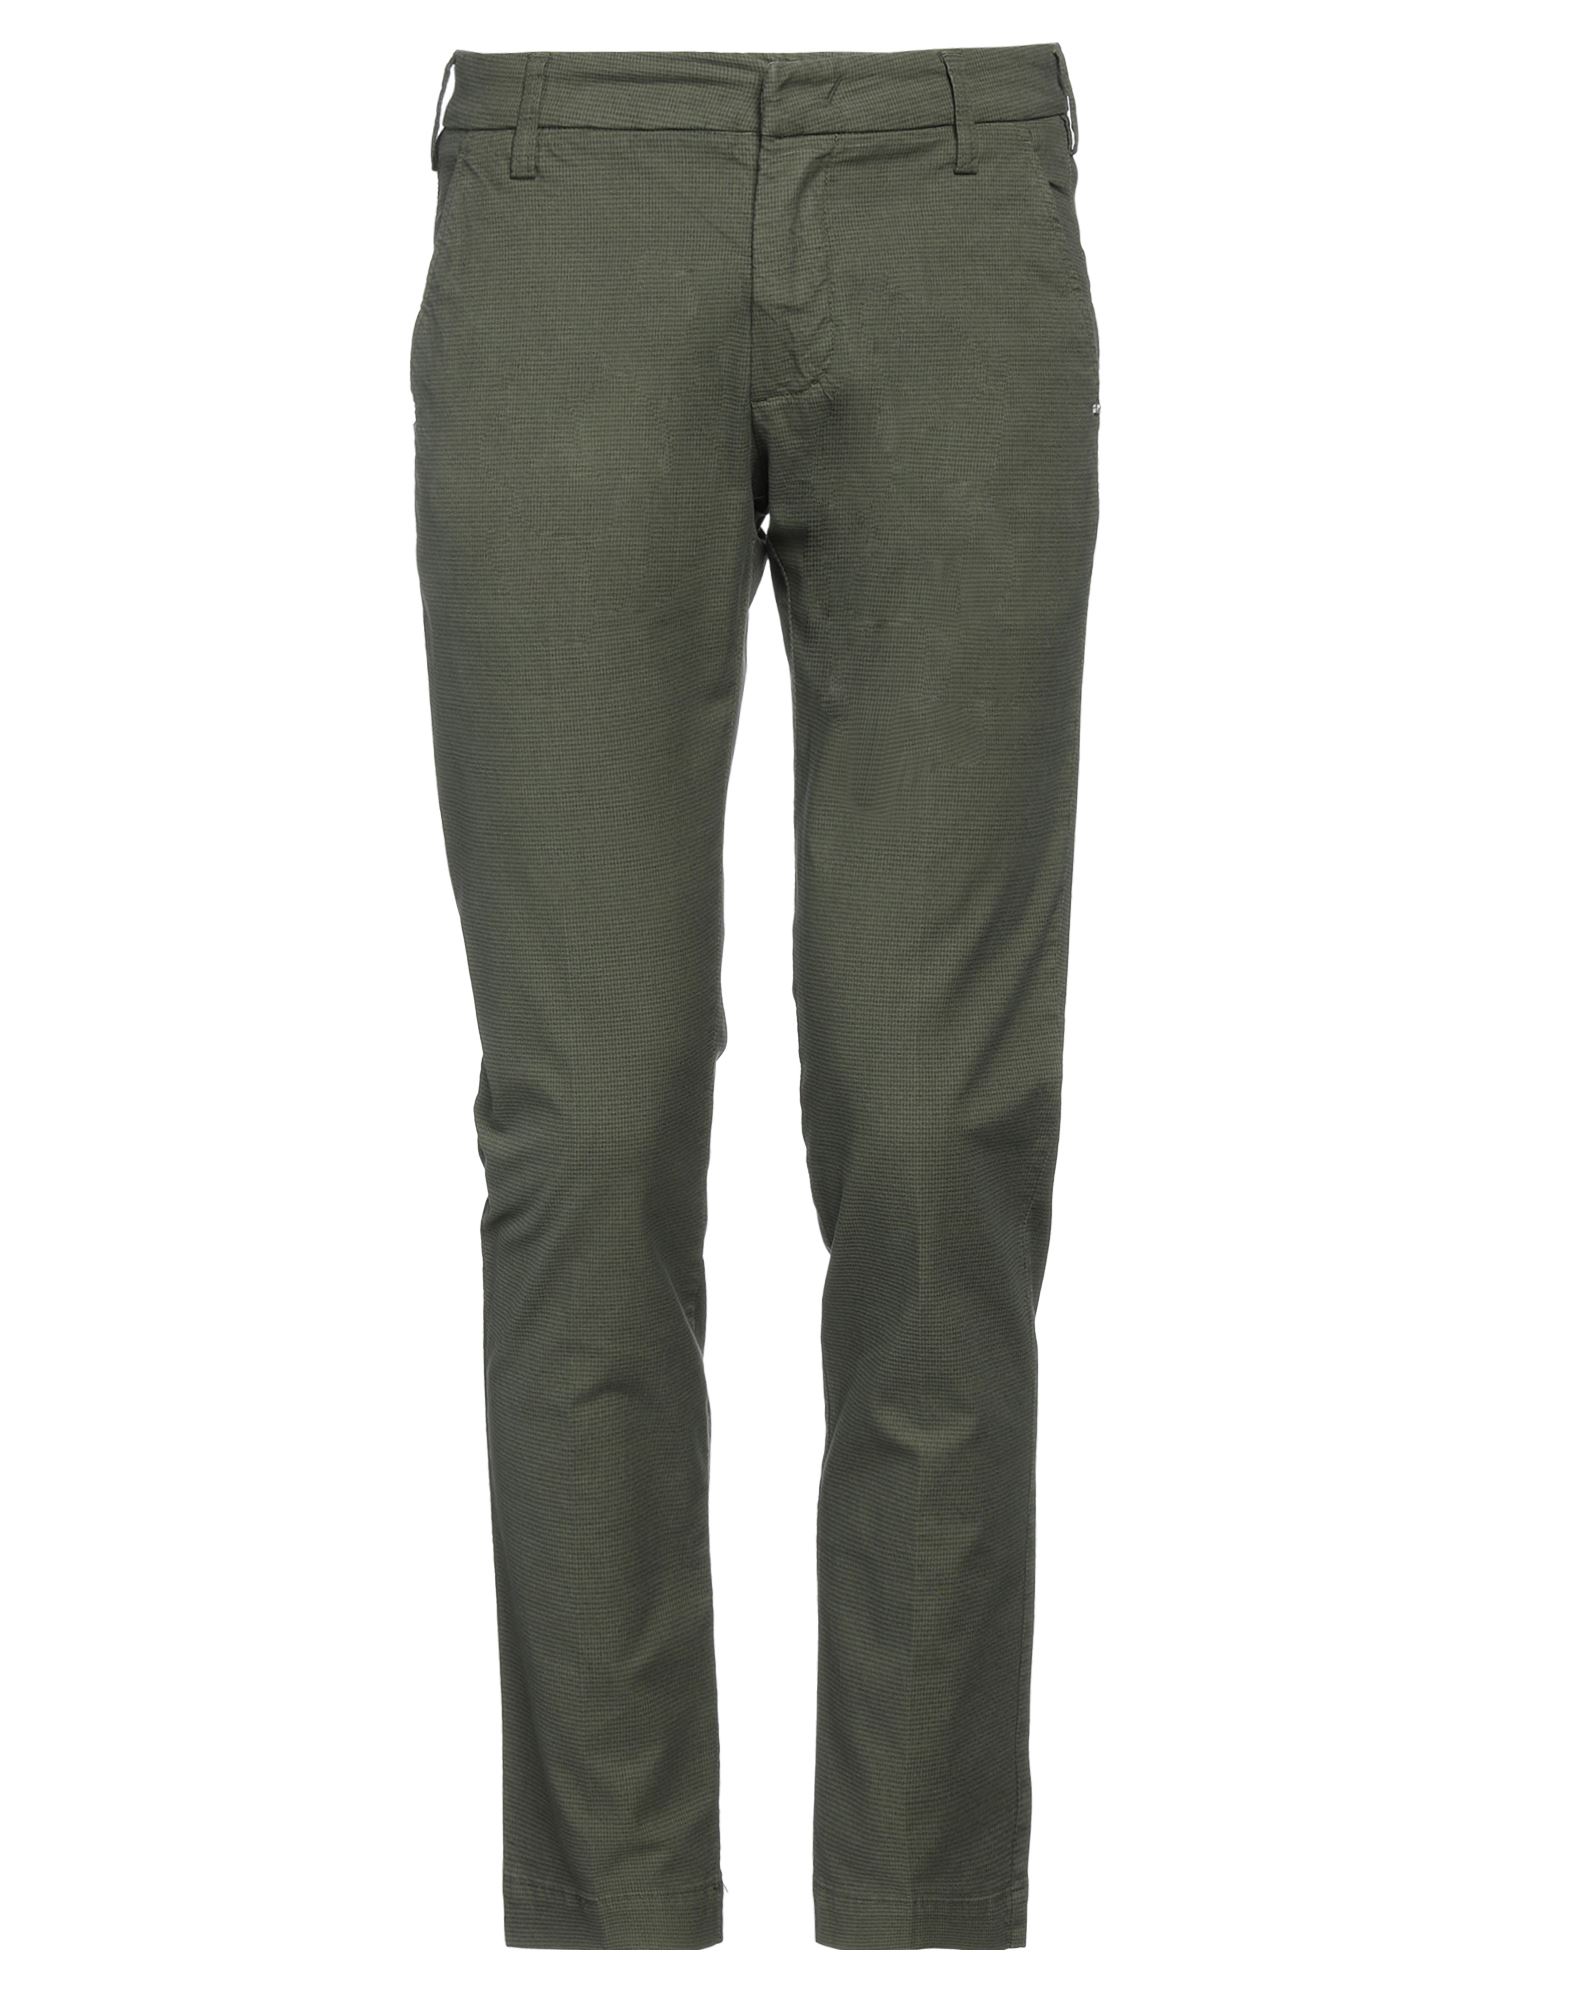 Entre Amis Pants In Military Green